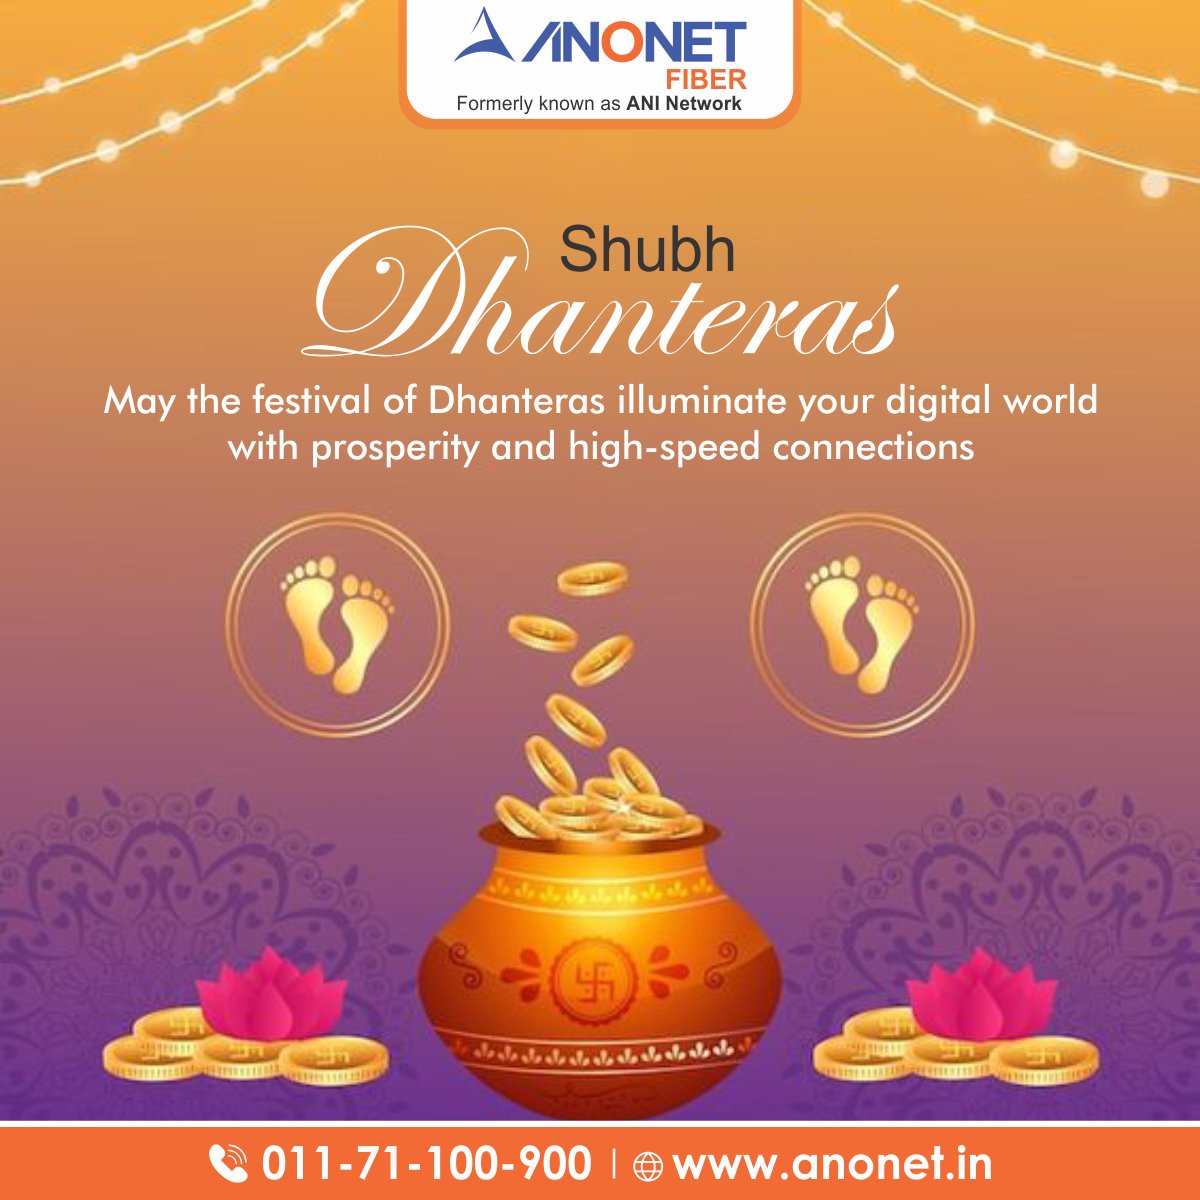 May the #festival of Dhanteras illuminate your #digital world with #prosperity and high-speed #connections. #Celebrate the power of #connectivity with ANONET! 💻🪔✨

#Dhanteras #ProsperousConnections #DigitalProsperity #HappyDhanteras
#Anonet #AnonetCommunications